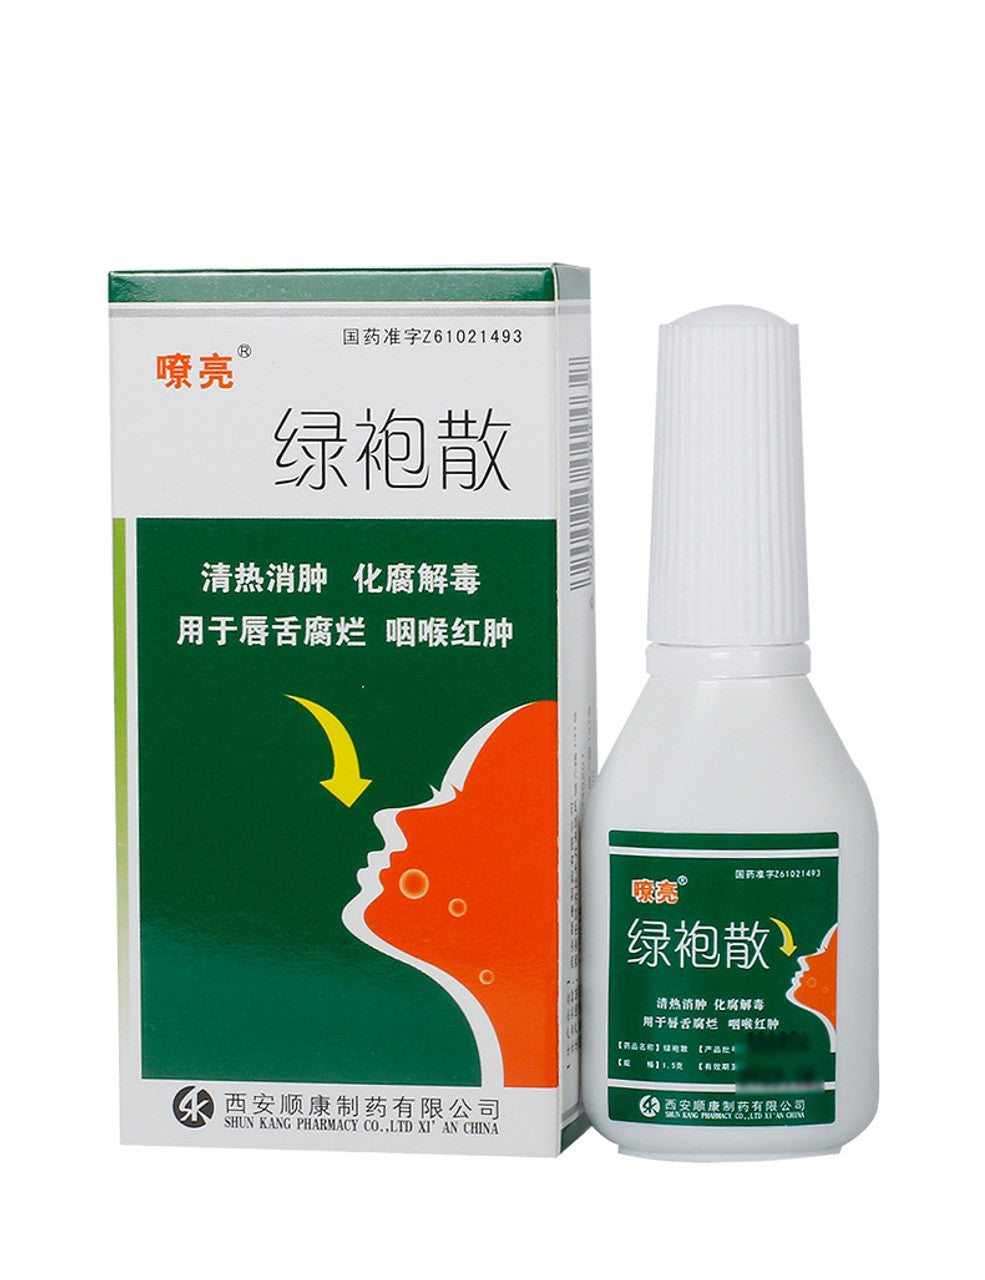 (1 bottle*5 boxes). Lv Pao San or Lv Pao Powder For Mouth Ulcers